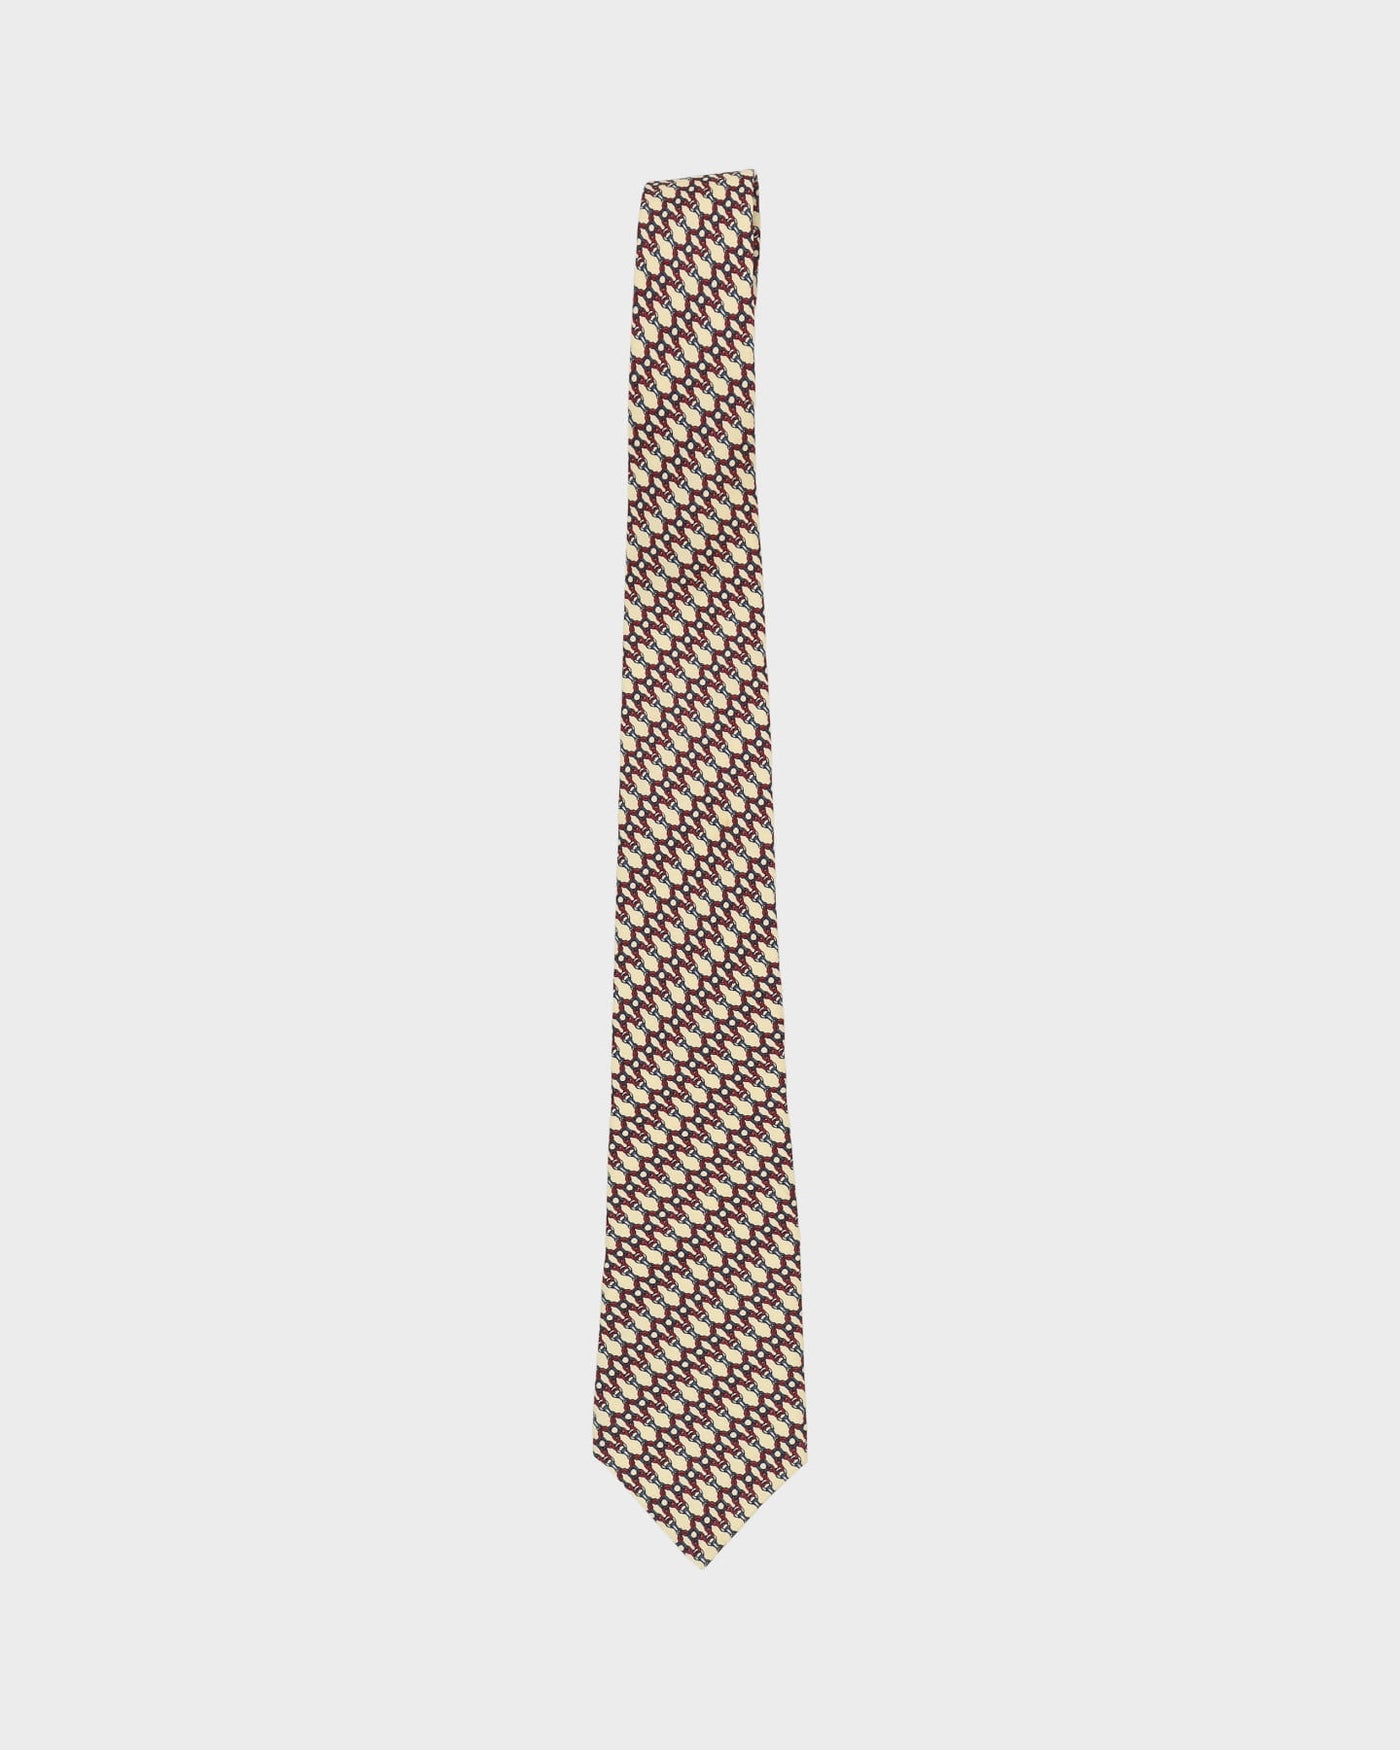 90s Liberty Beige / Red Patterned Silk Tie